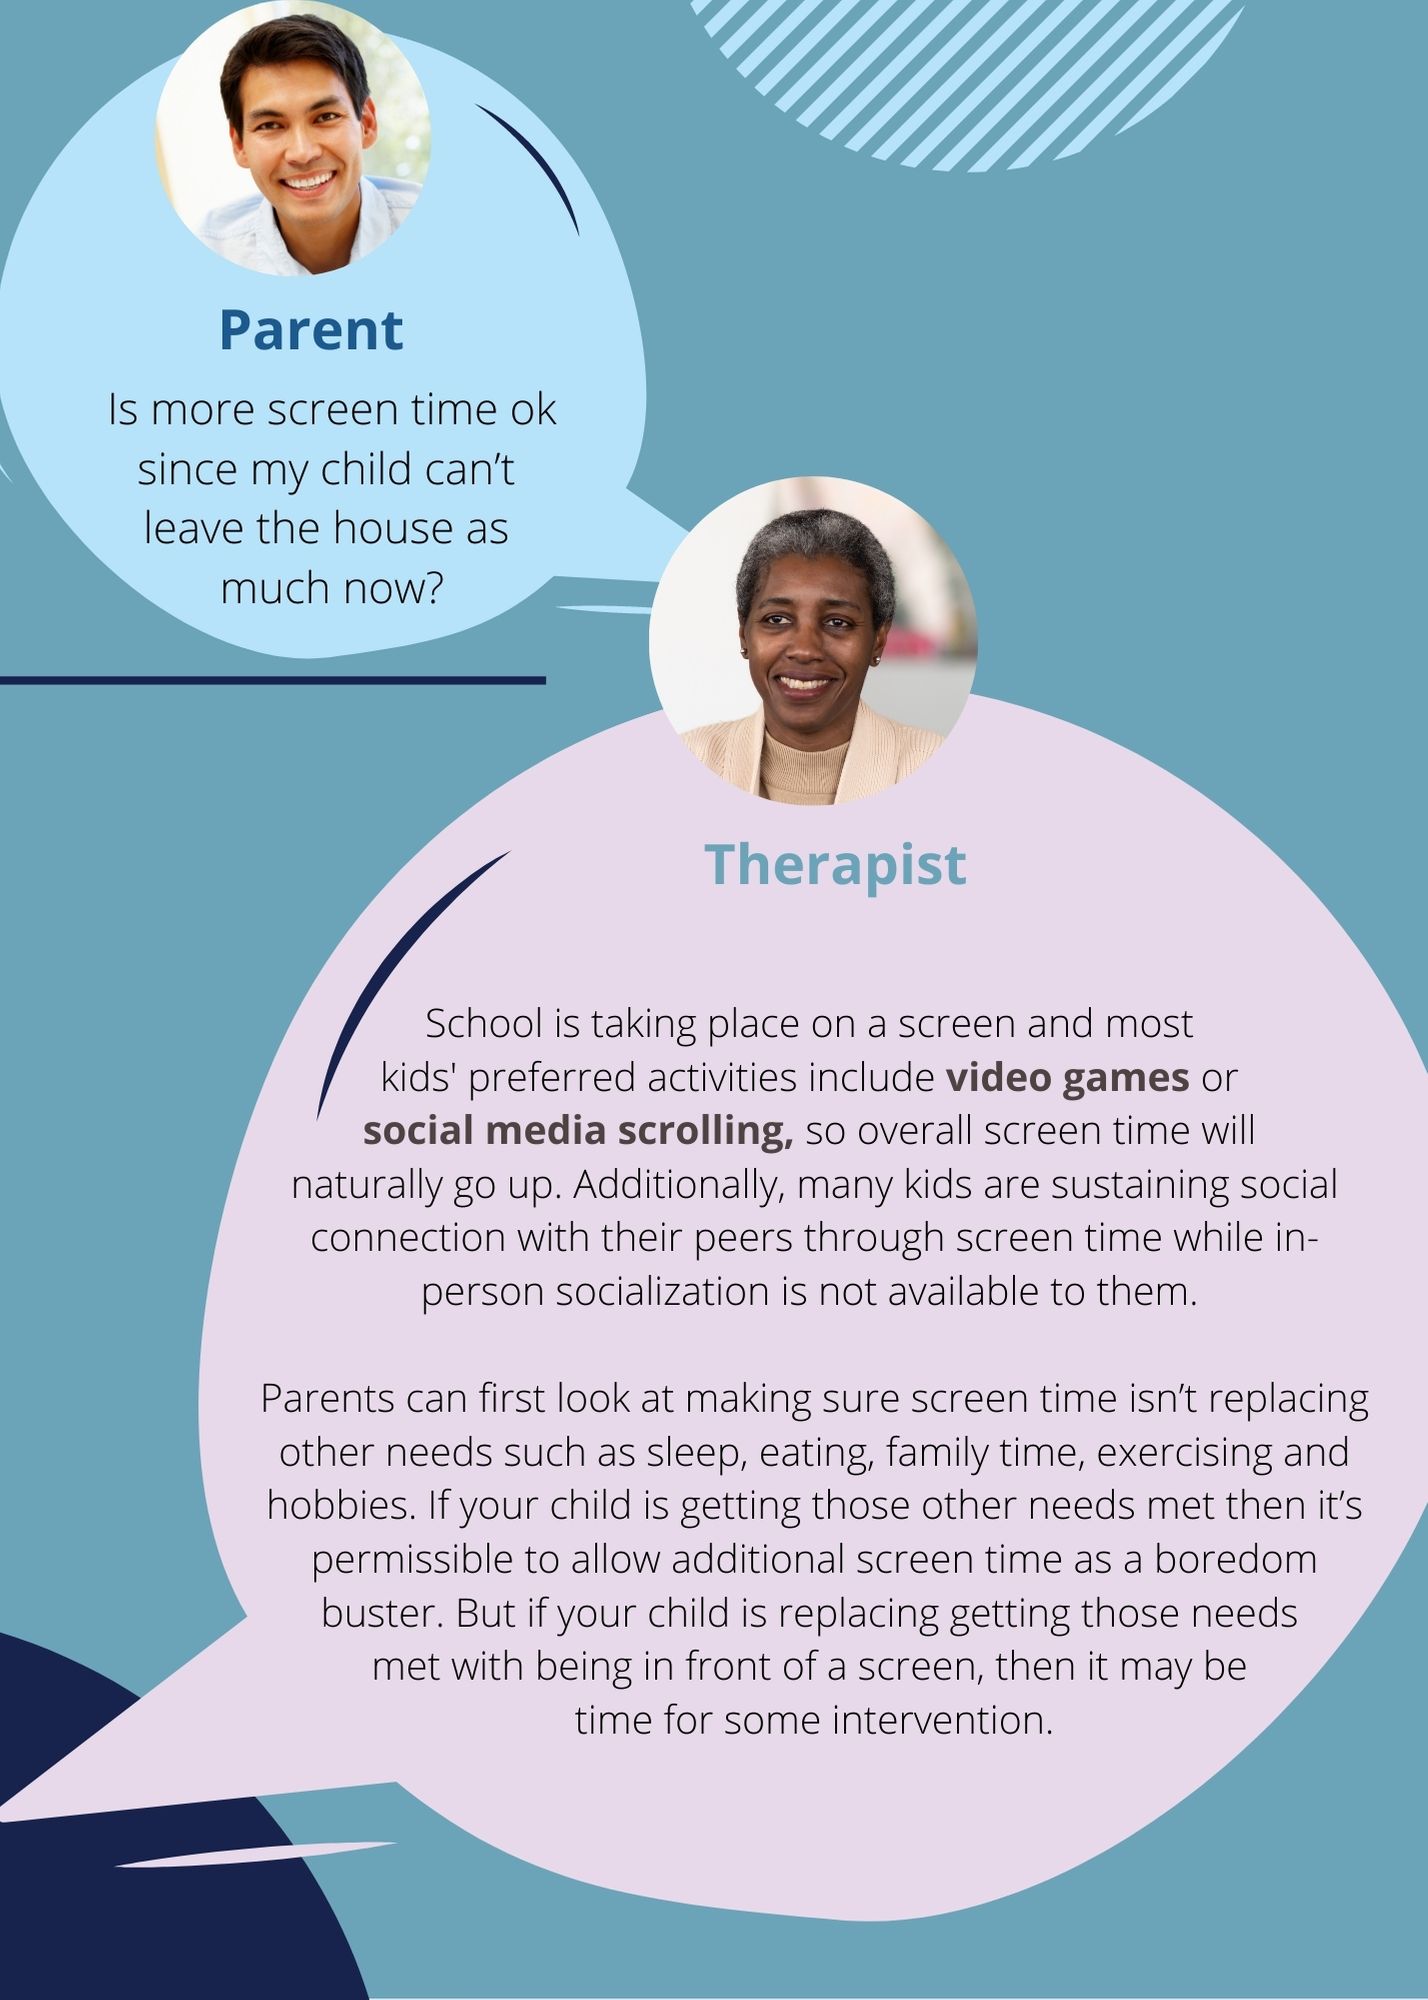 A parent asks, "Is more screen time okay since my child can't leave the house as much during COVID-19 shelter-in-place?" A therapist answers that screen time will naturally go up during online school and connecting with their peers virtually during quarantine. But if screen time is replacing sleep, exercise, family time or hobbies, it may be time for some intervention.